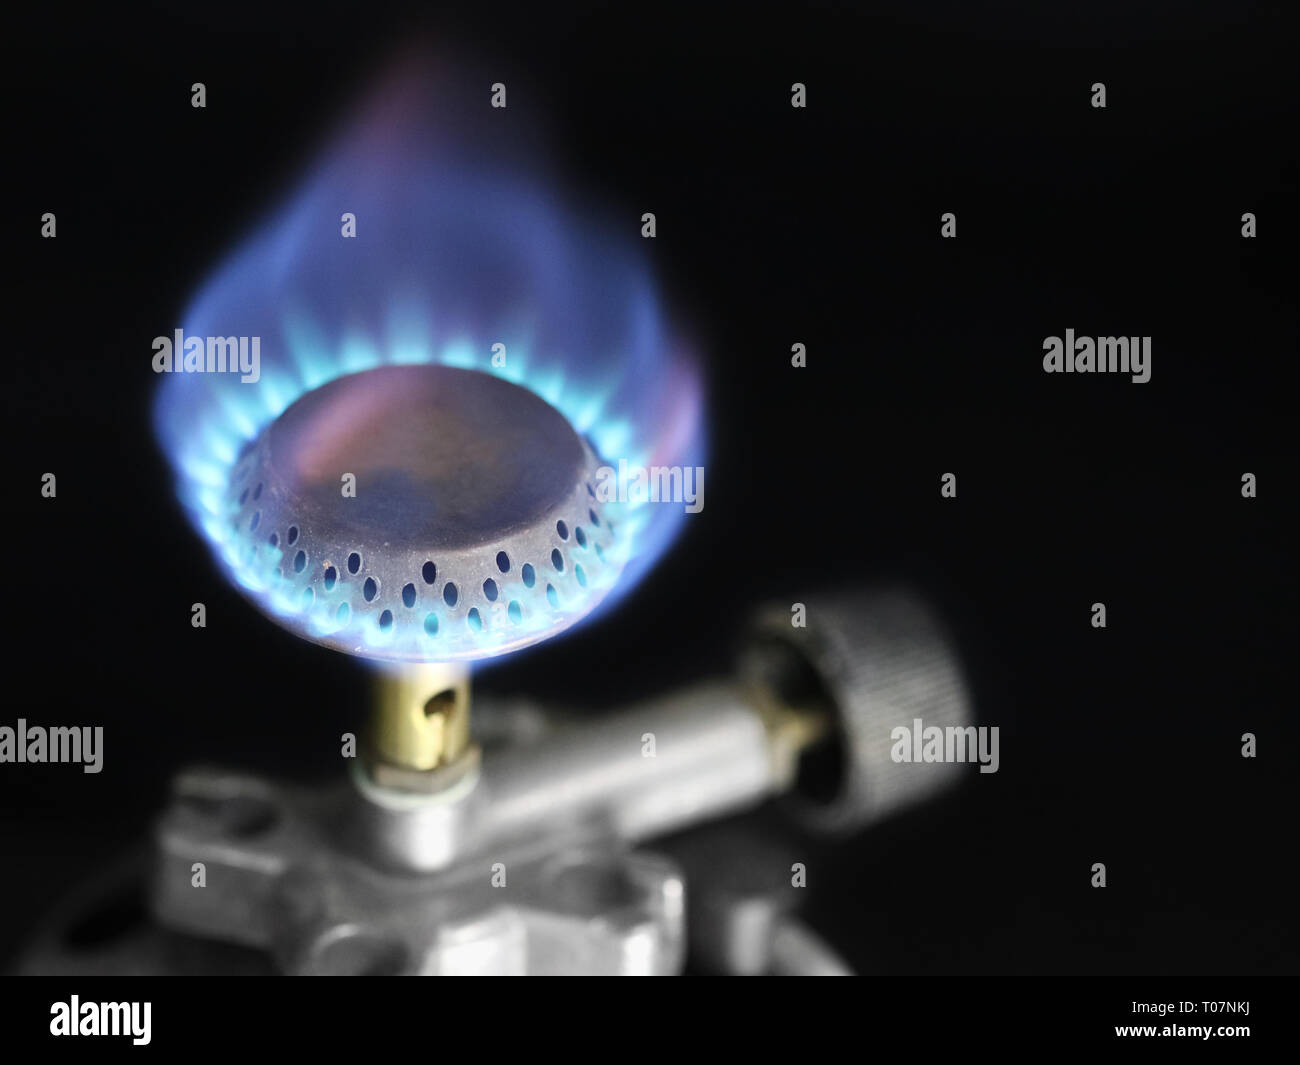 Flame of a gas burner, cartridge burner on black background with copy space Stock Photo